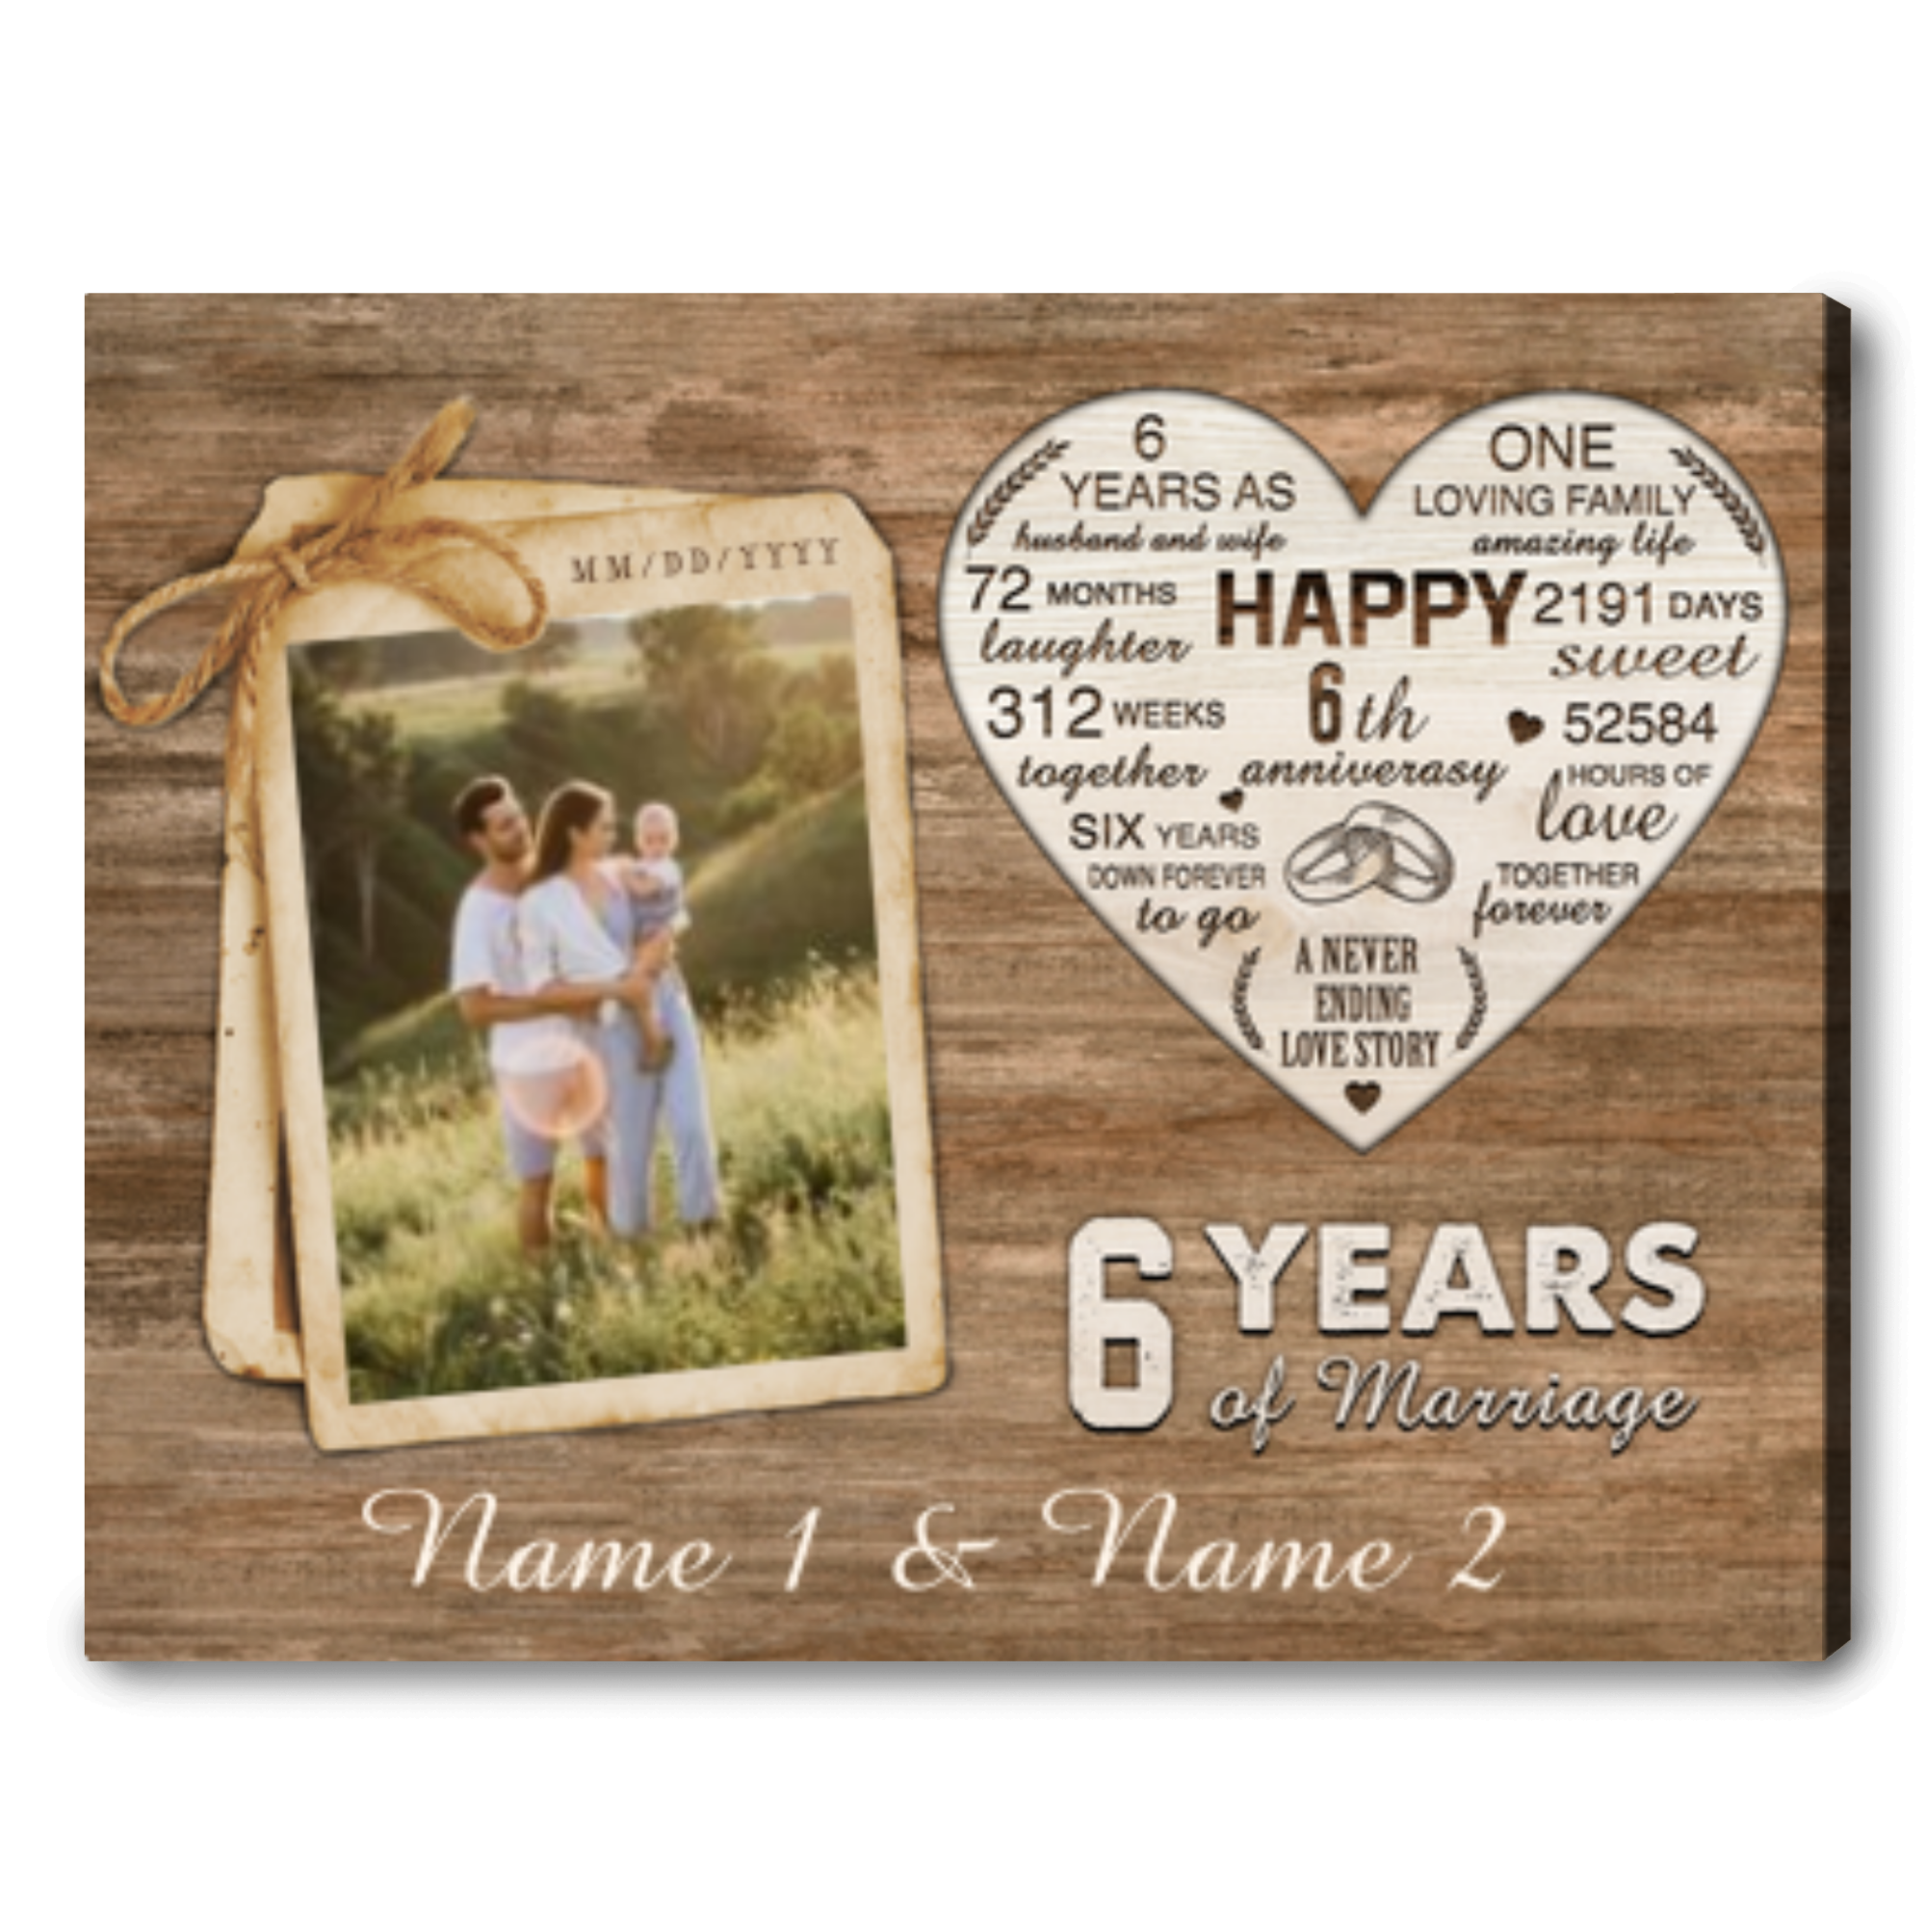 Personalized Picture Frames 6th 6 Year Wedding Anniversary Gifts